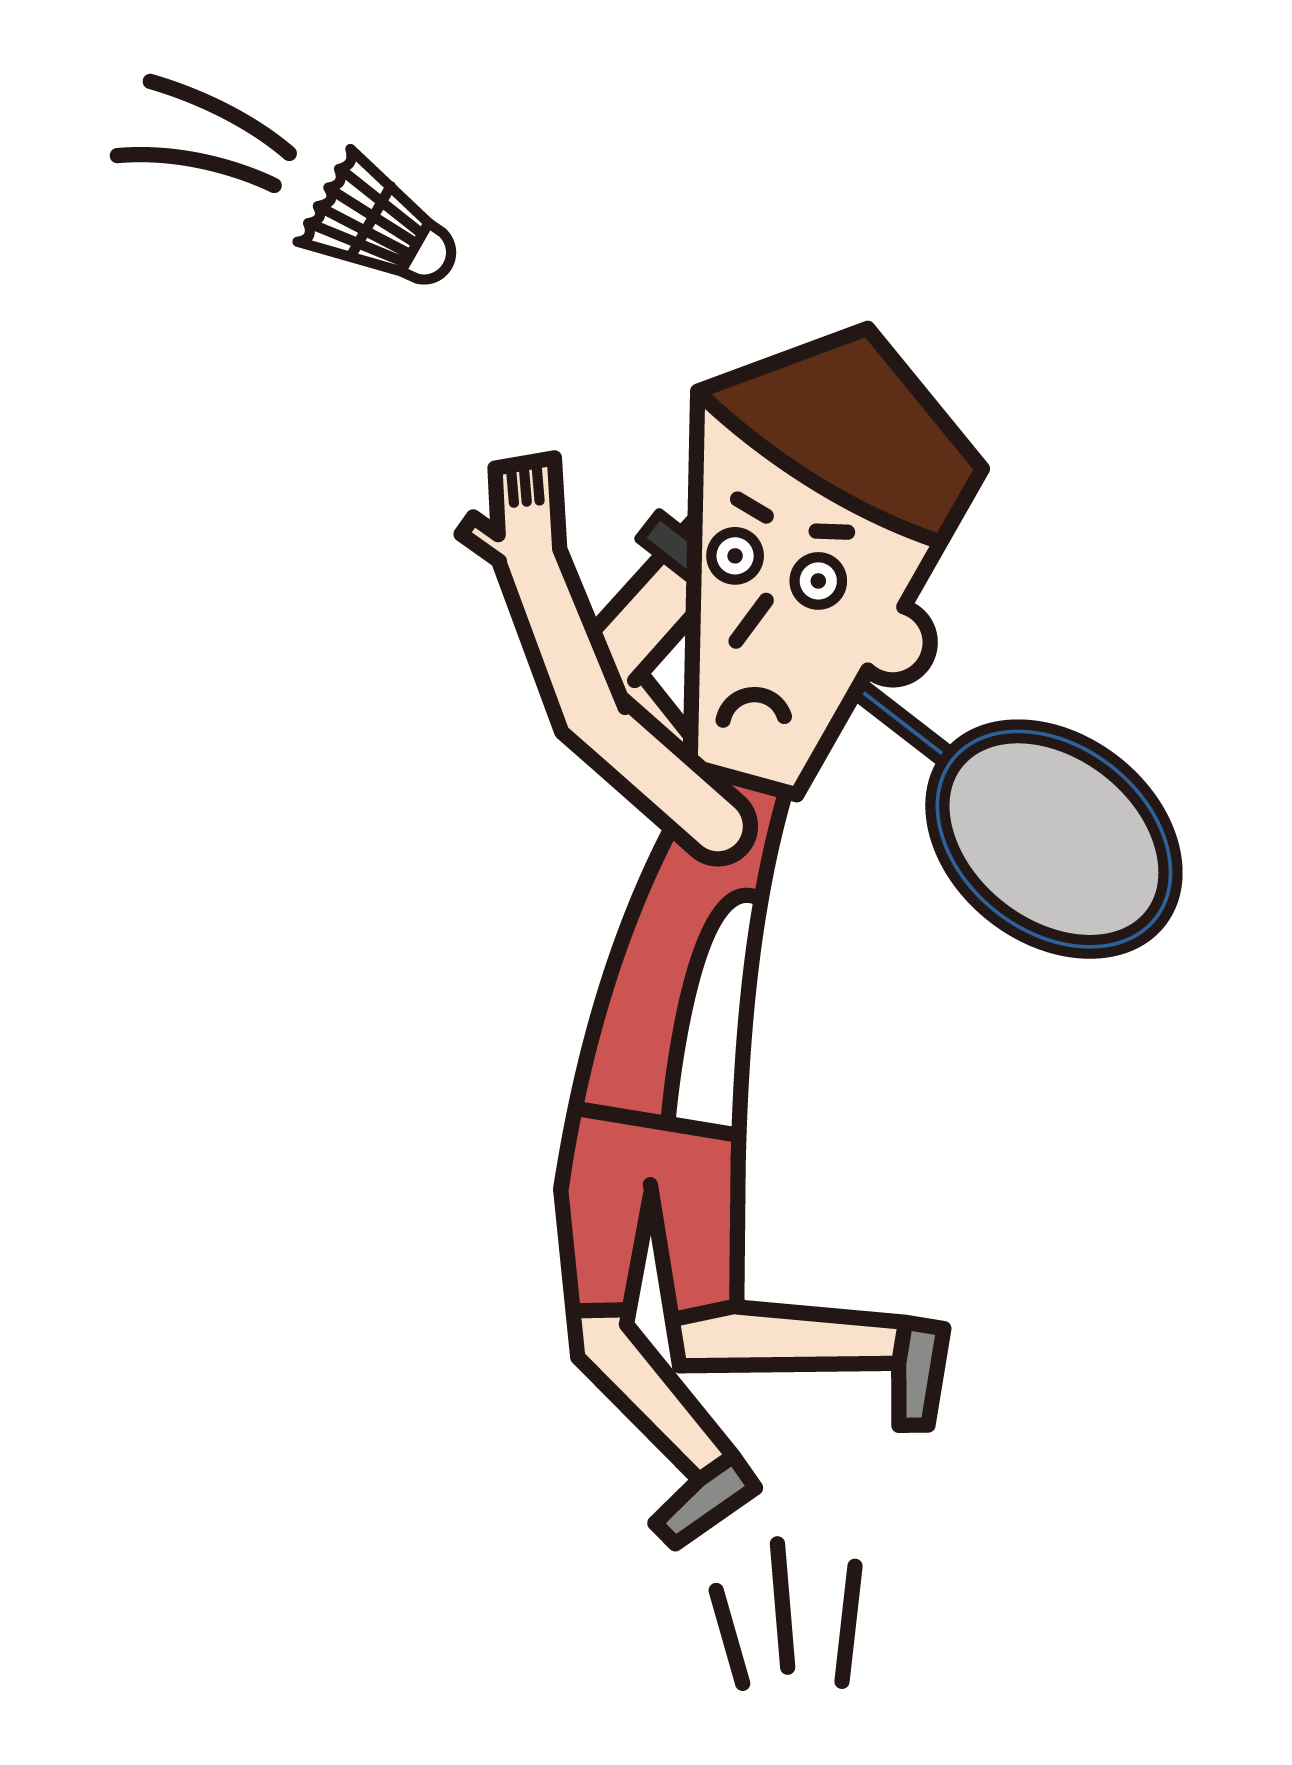 Illustration of a jumping badminton player (male)